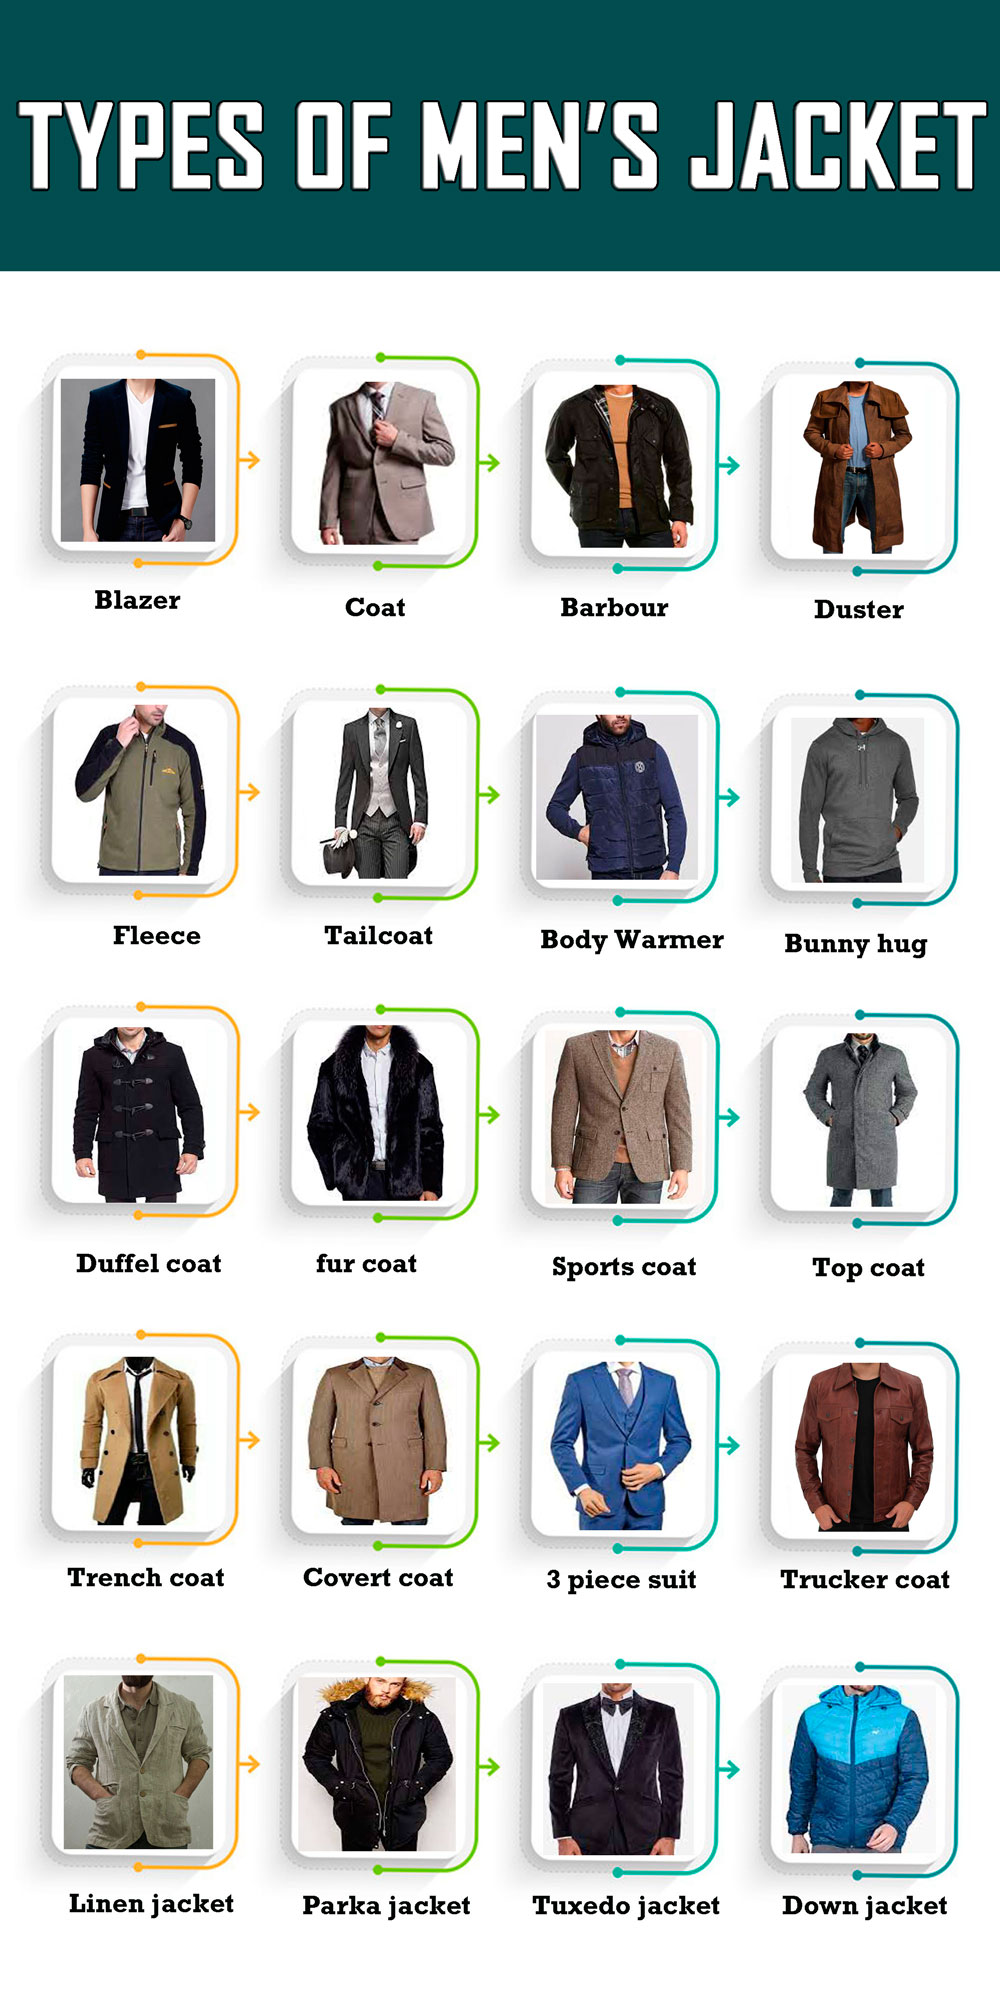 How to Choose the Best Coats for Different Body Types - Petite